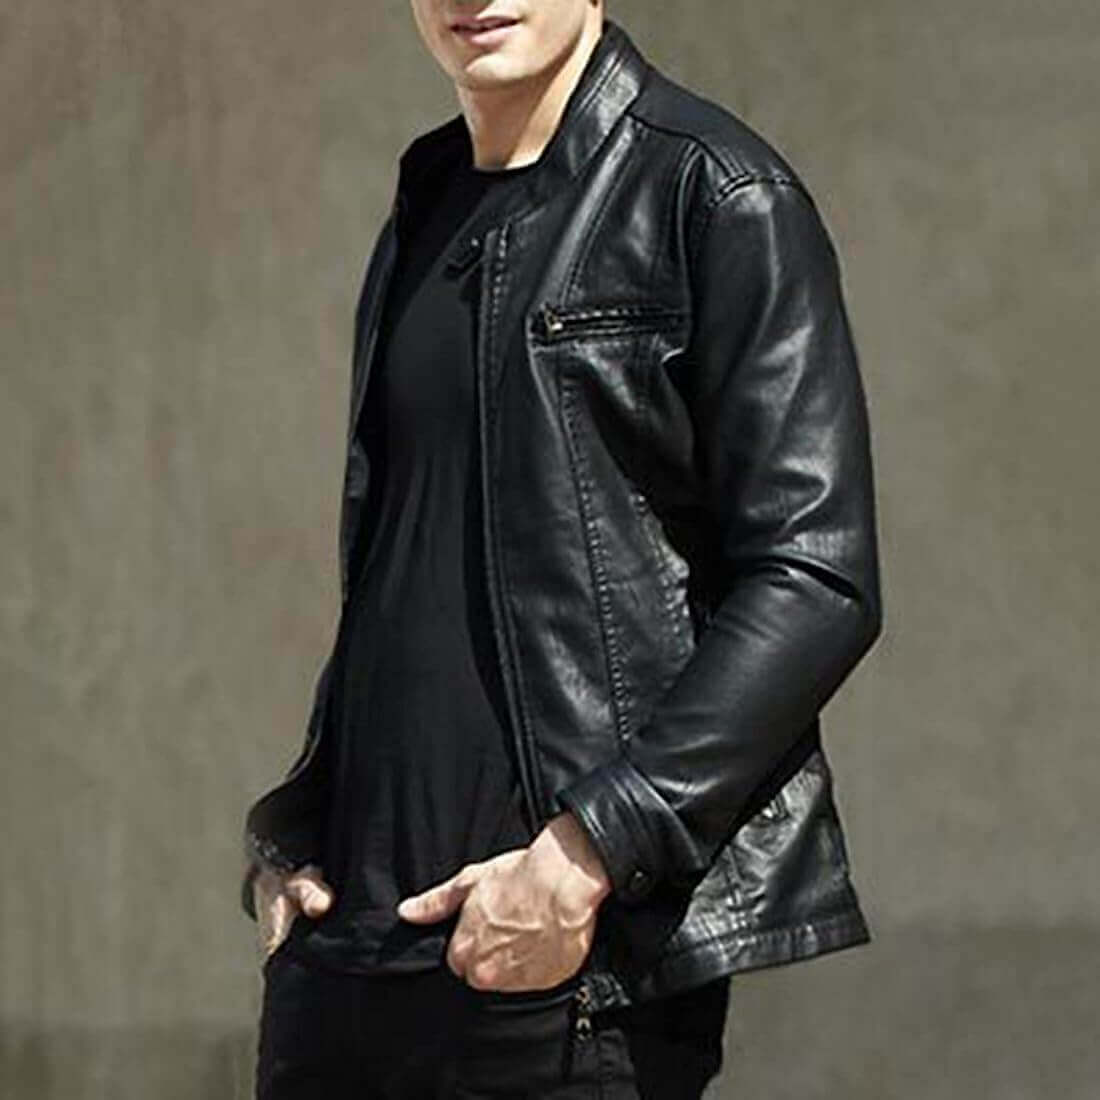 Black Leather Jackets, Latest Fashion for men in Pakistan